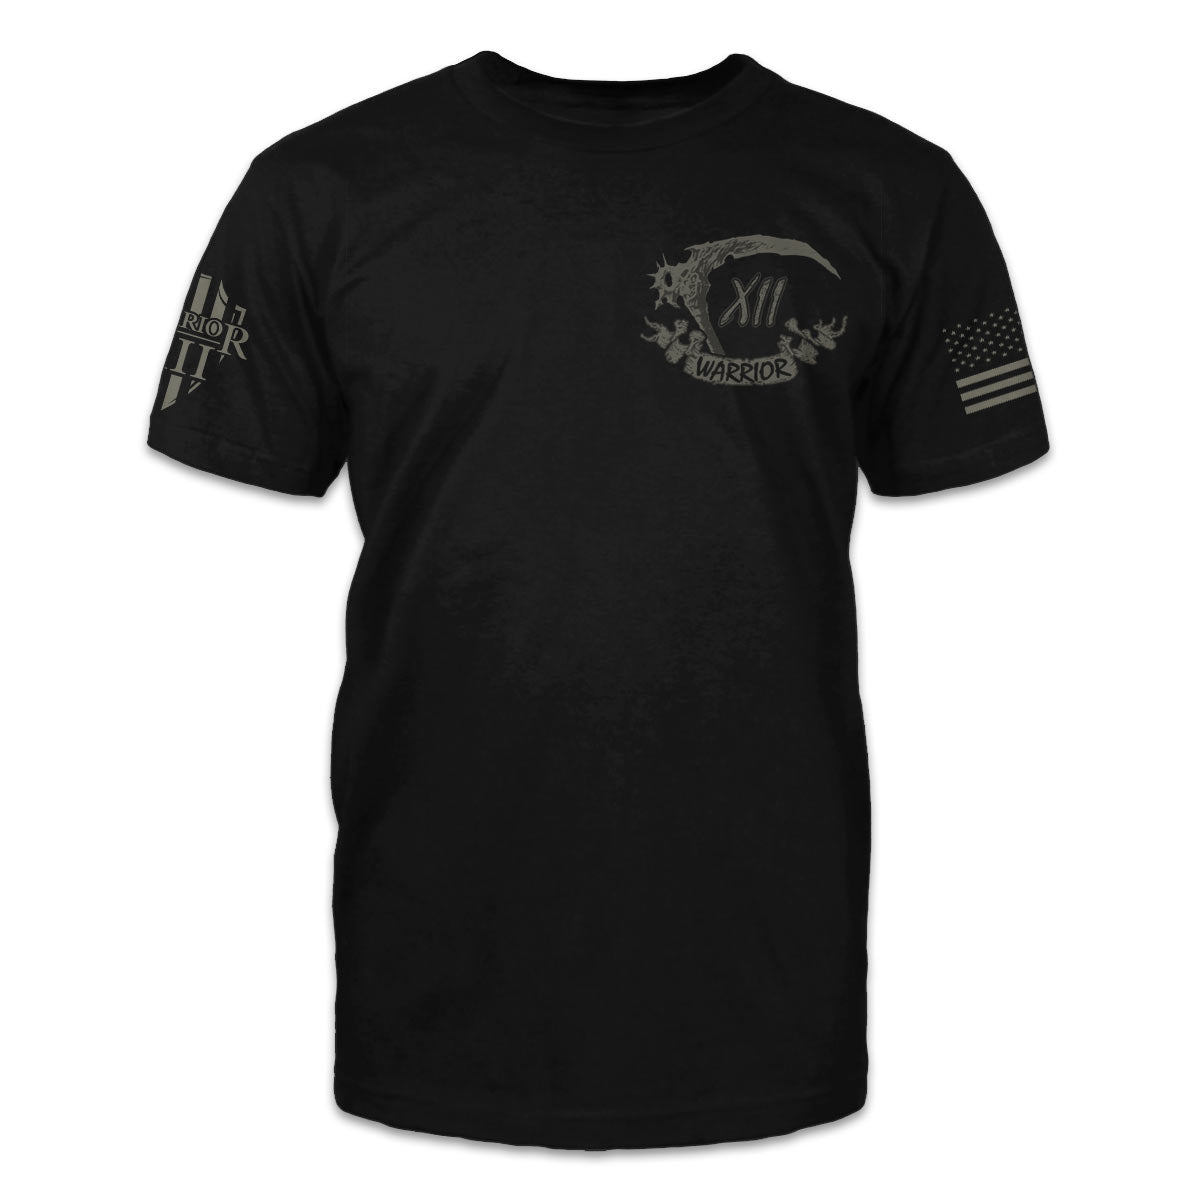 A black t-shirt with the words Warrior and a reaper scythe printed on the front.